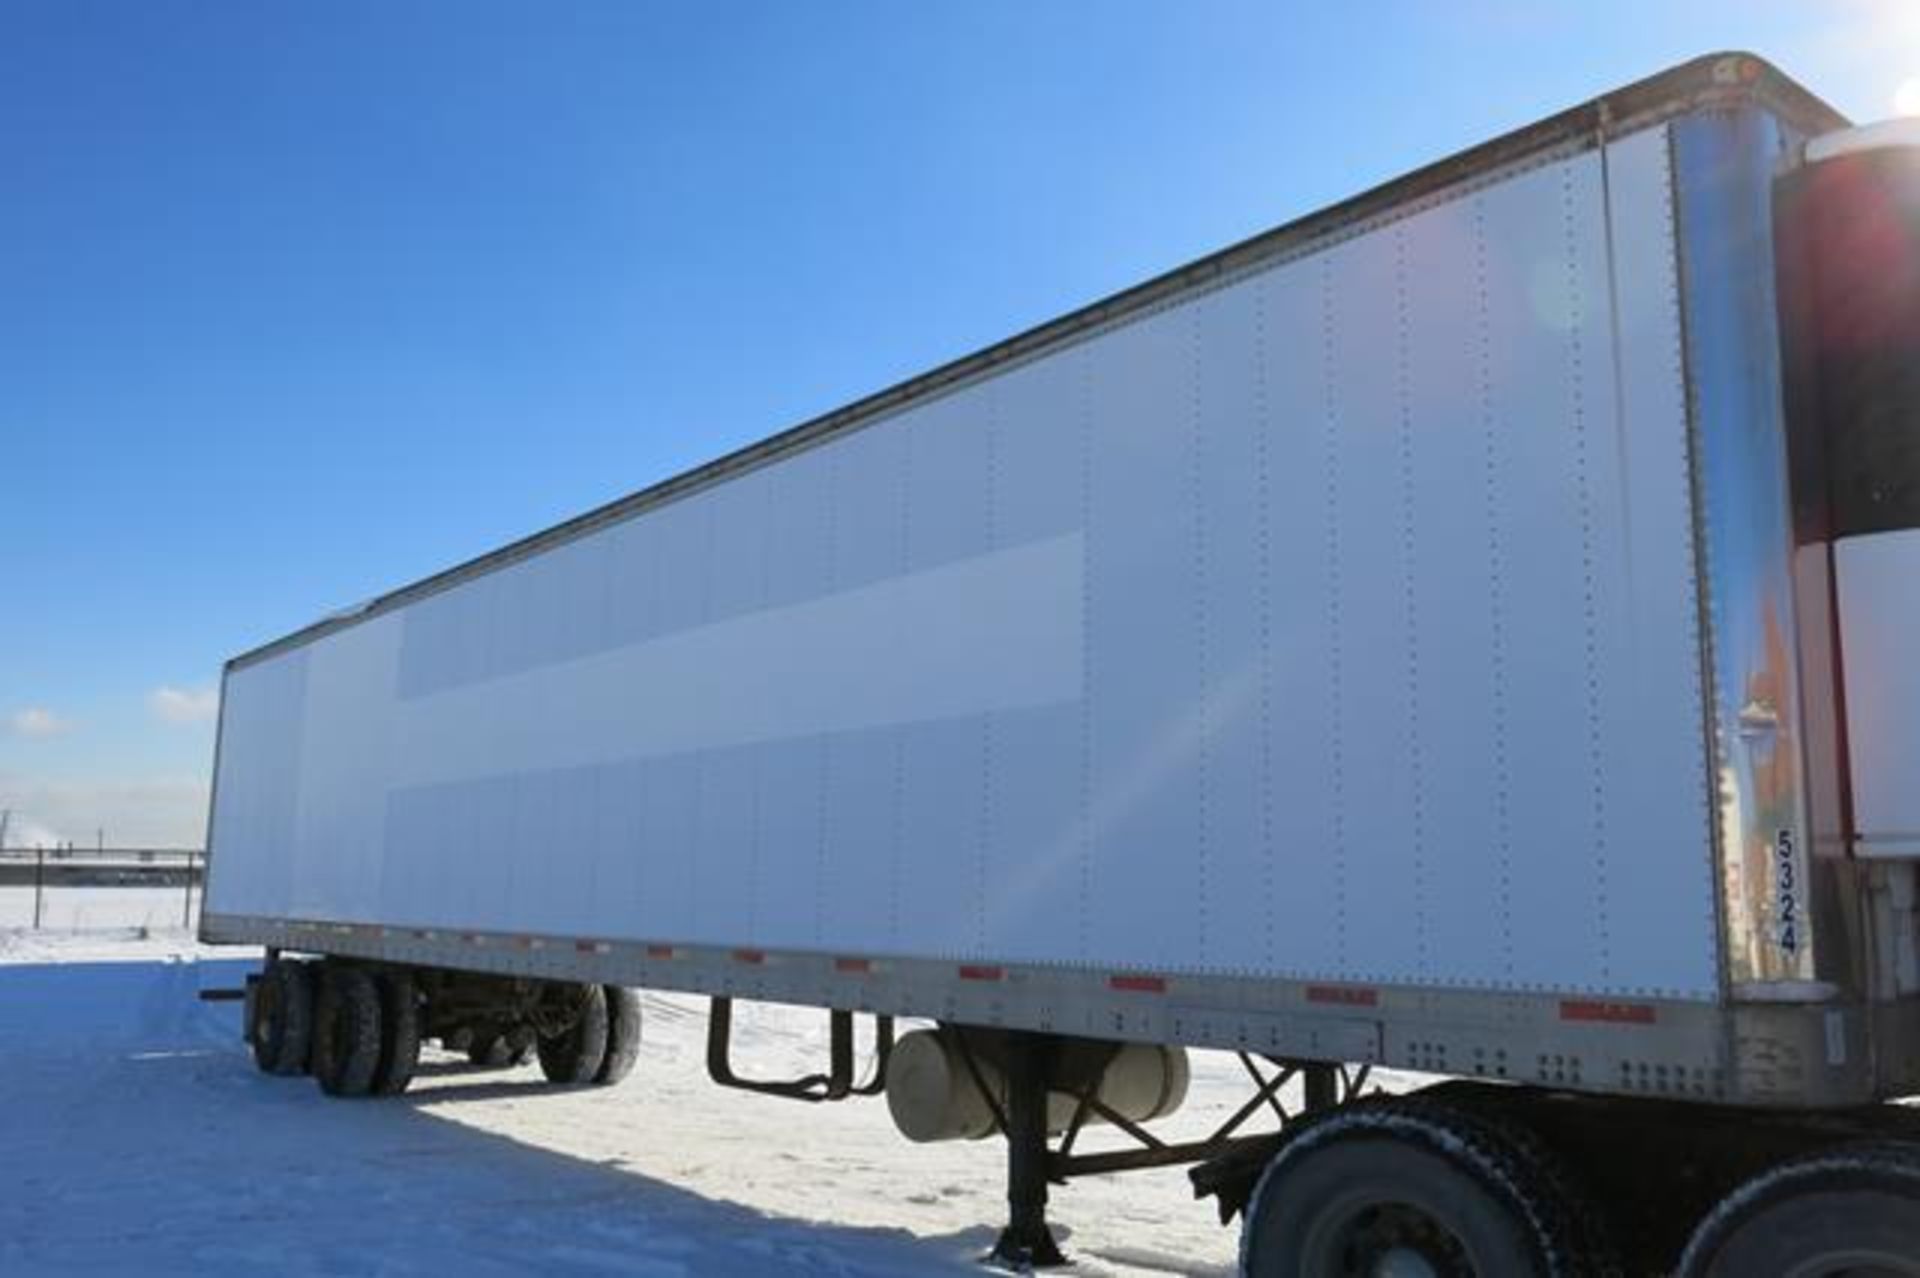 TRAILMOBILE, 53' REFRIGERATED VAN TRAILER, BARN DOORS, THERMO KING, SB-210, REEFER, 14,880 HOURS